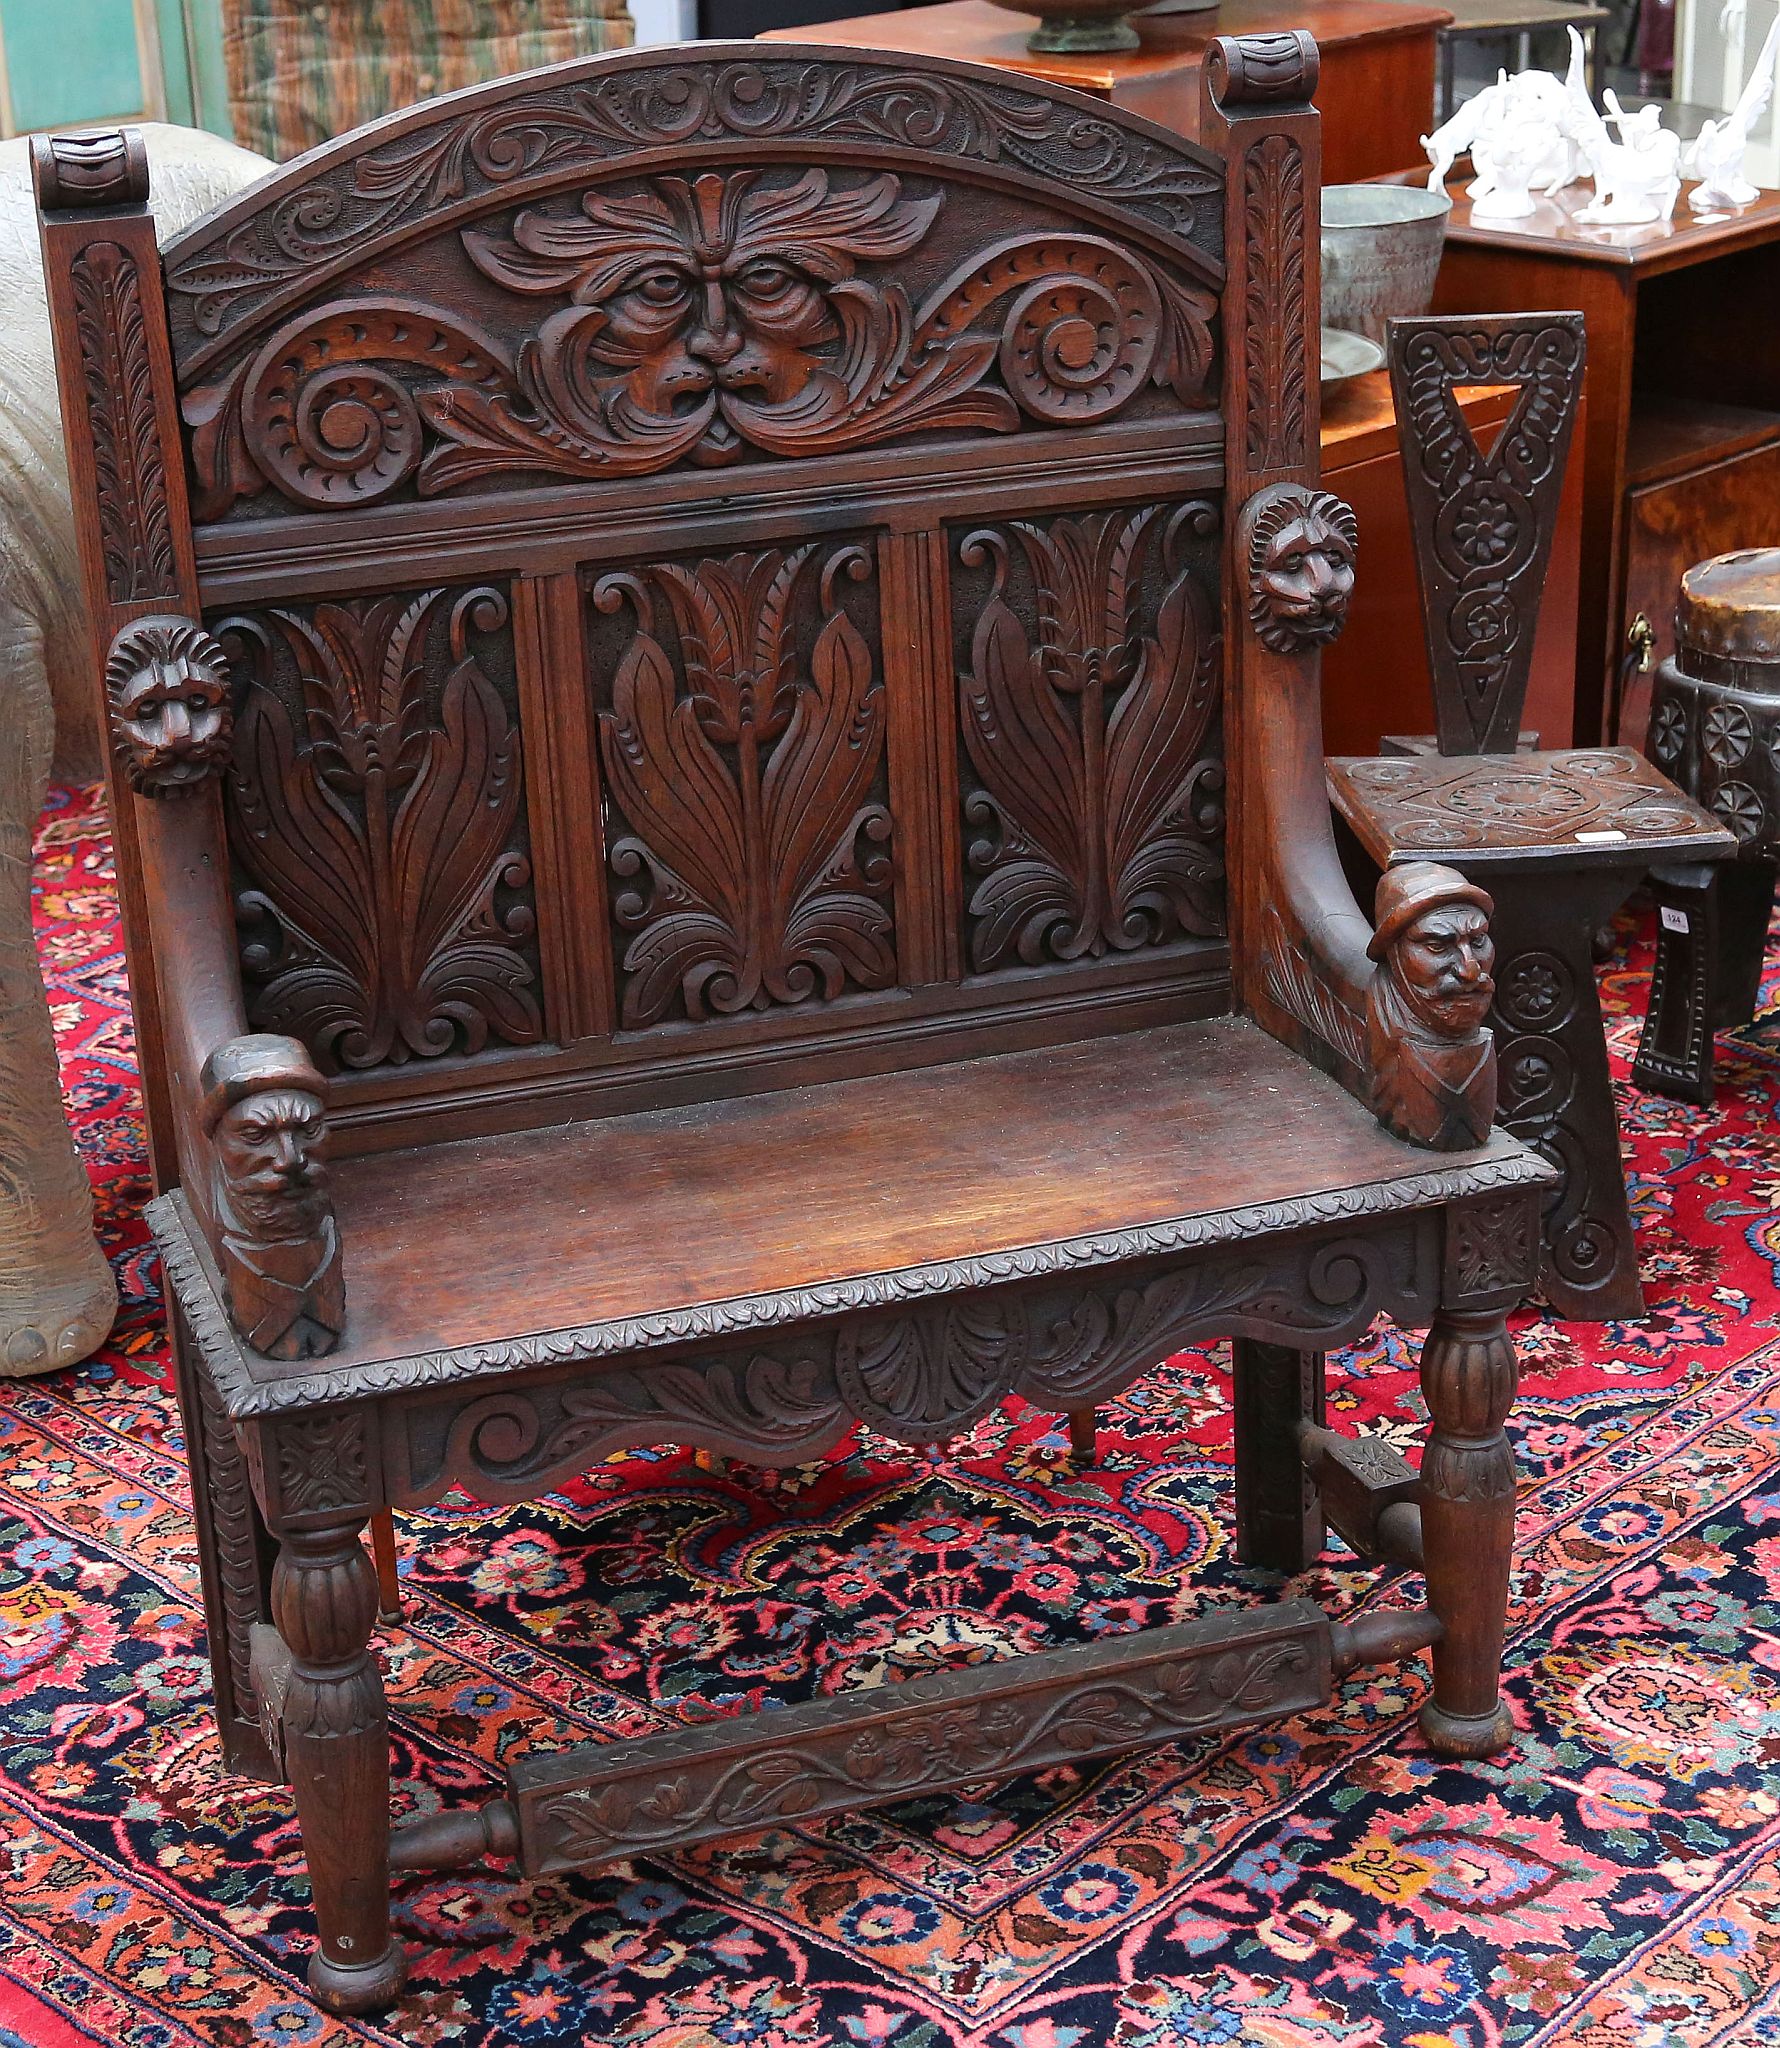 Late 19th / early 20th century Flemish panelled oak high back bench seat carved throughout with